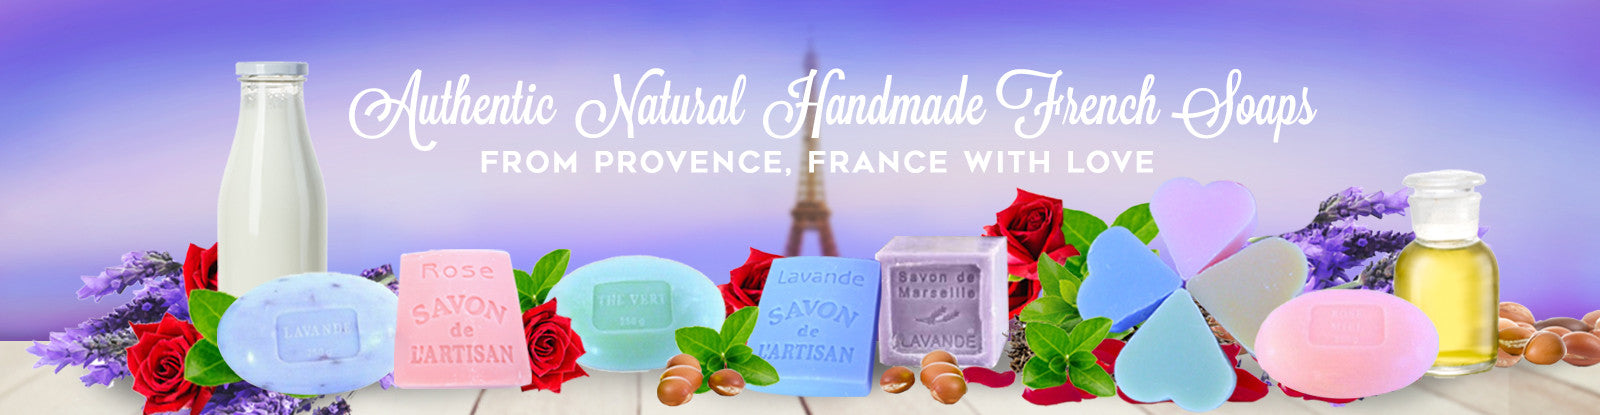 World's Premium Handmade Natural Soaps from France